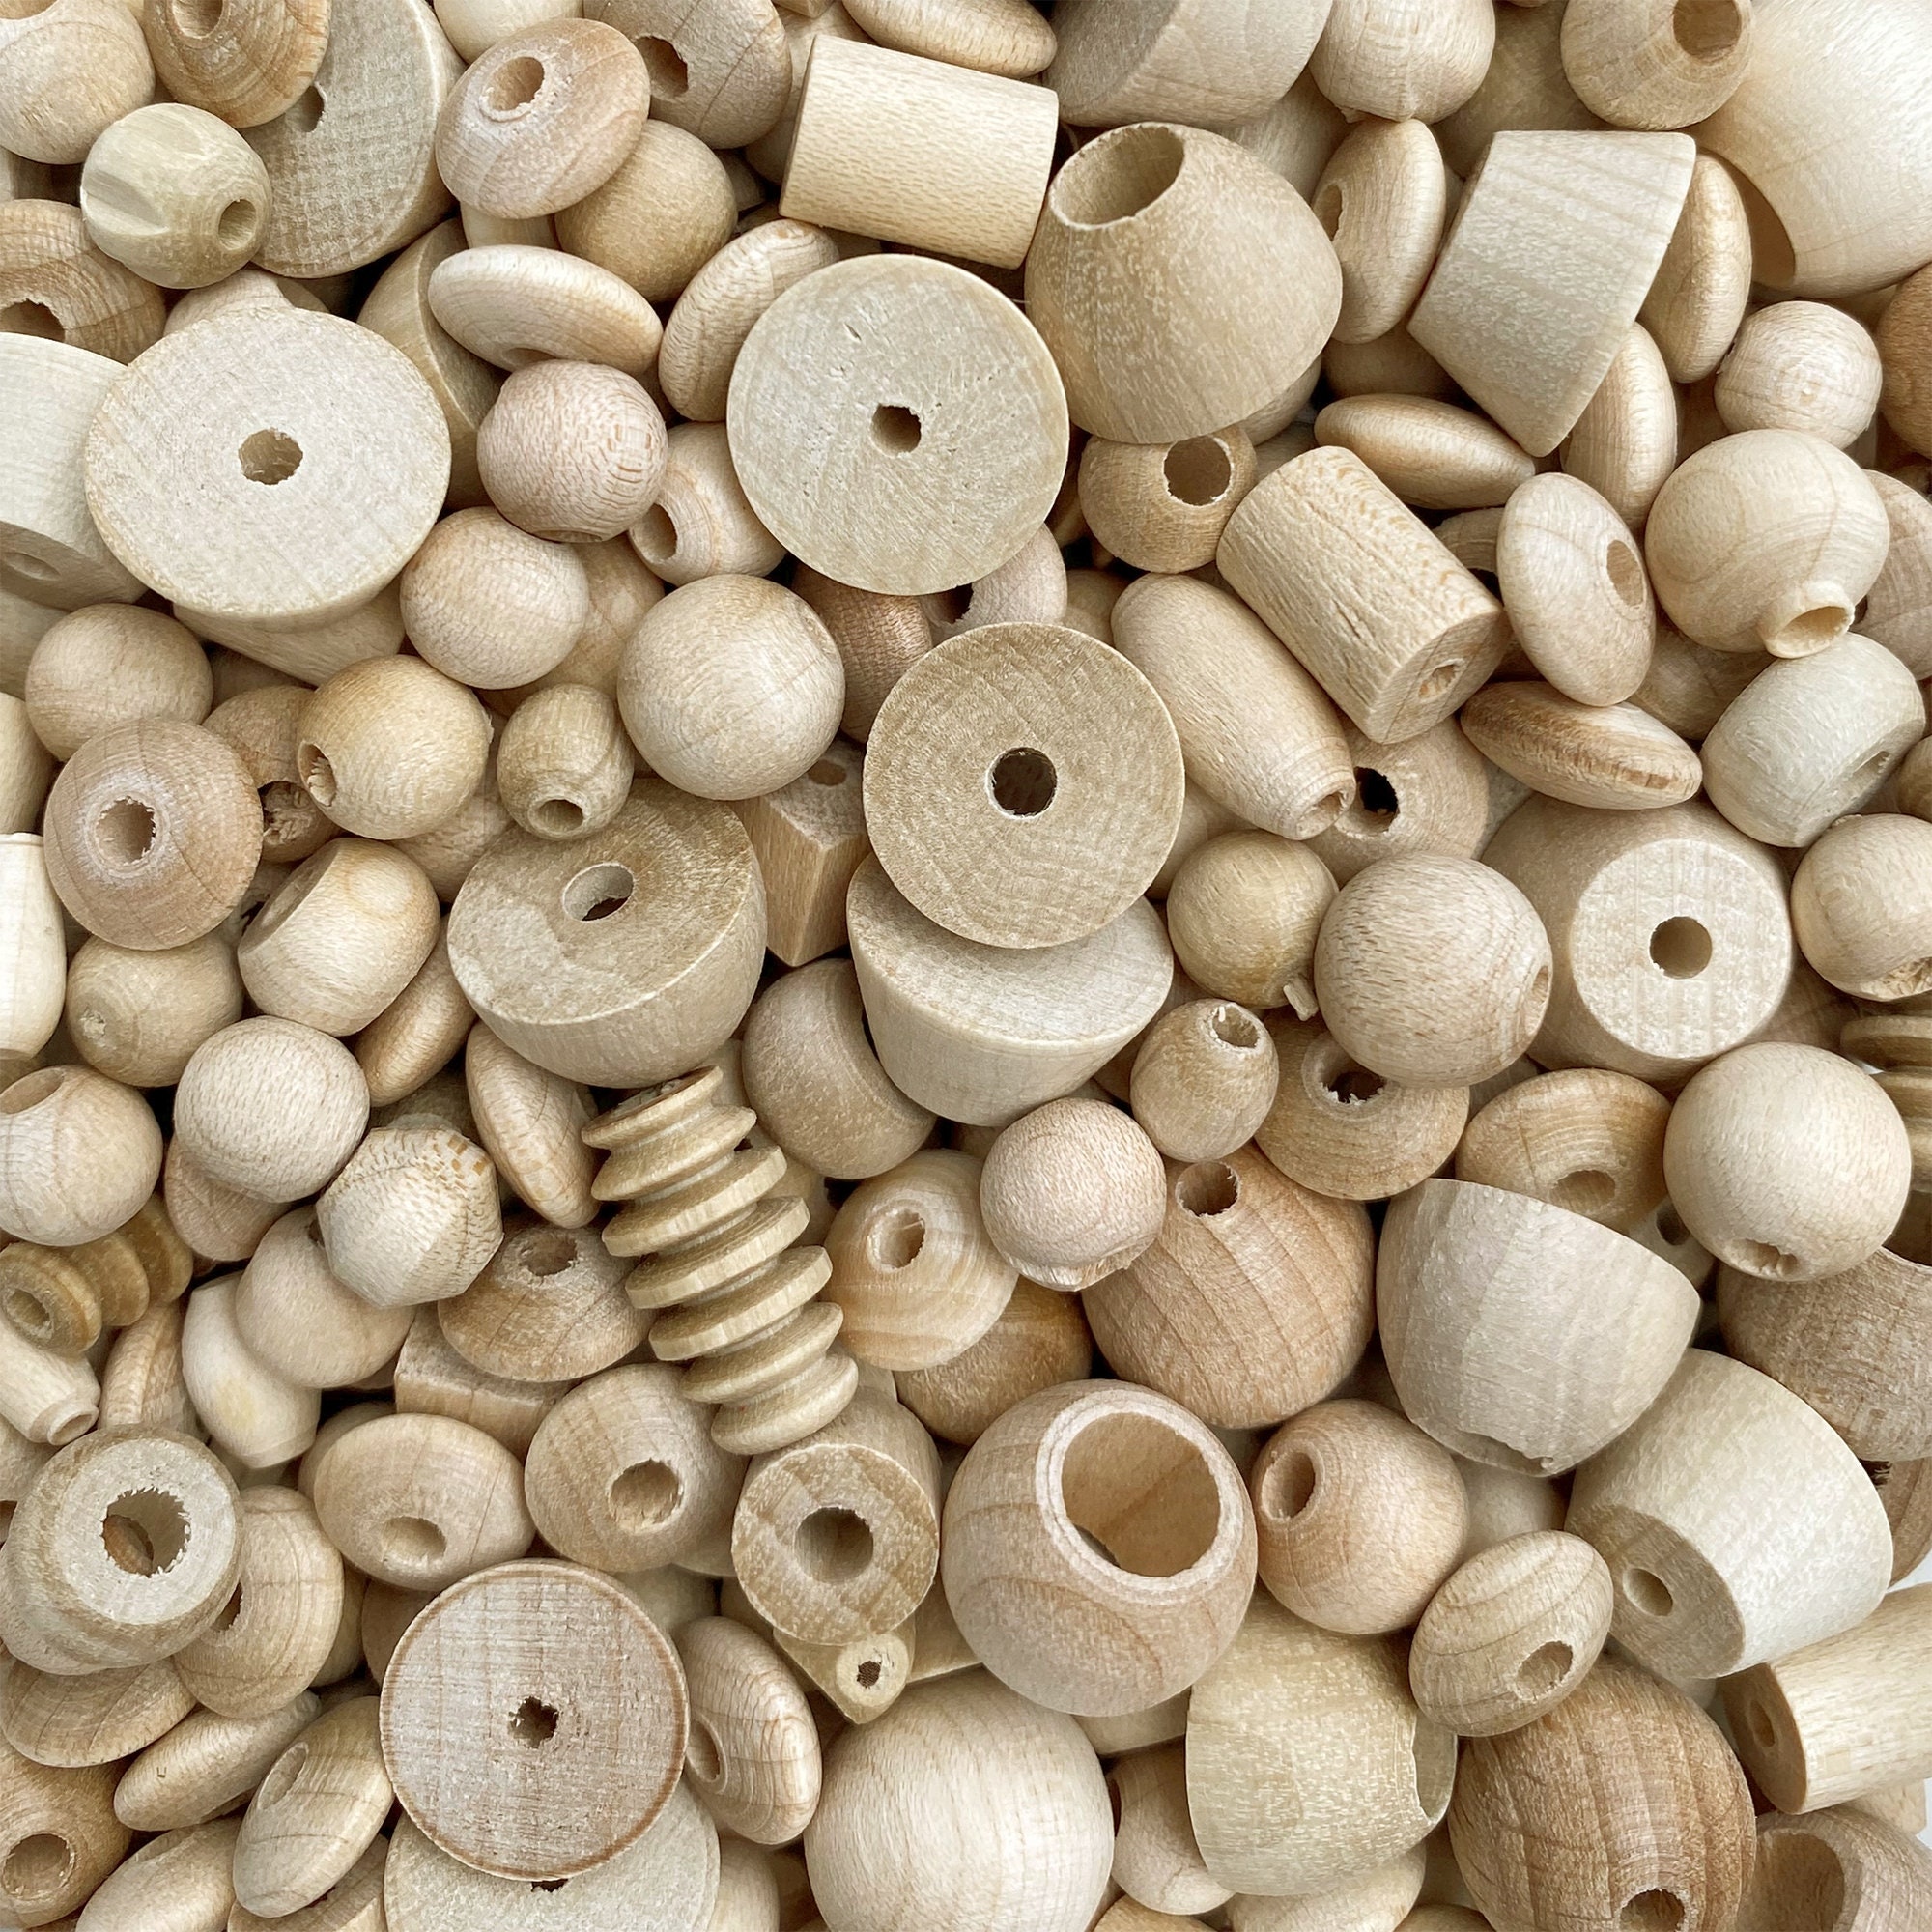 4-10 Pieces Large Beads,natural Wood Beads,wooden Round Beads 40mm 